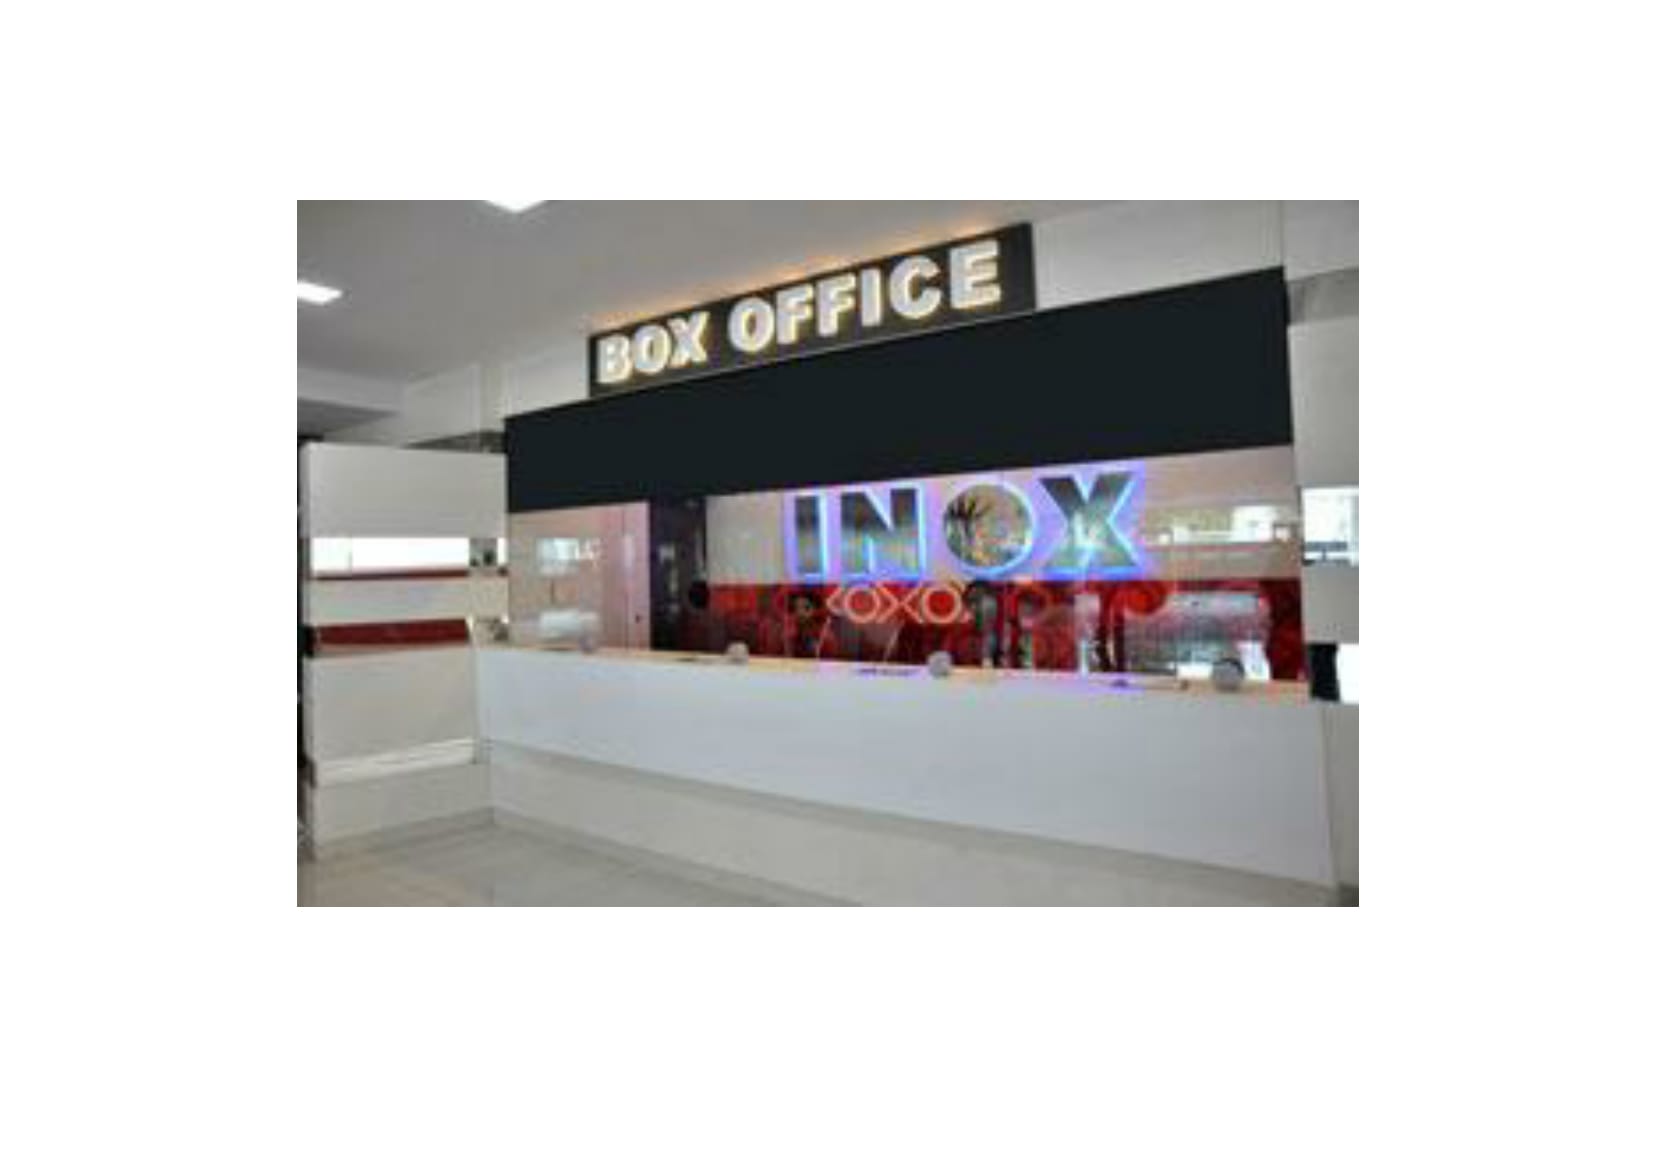 INOX Leisure Limited (INOX) is amongst India’s largest multiplex chains with 113 multiplexes, 446 screens spread in 57 cities, making it a truly Pan India multiplex chain. For easy and convenient ticket booking, INOX offers online booking on www.inoxmovies.com and through its smartphone applications.